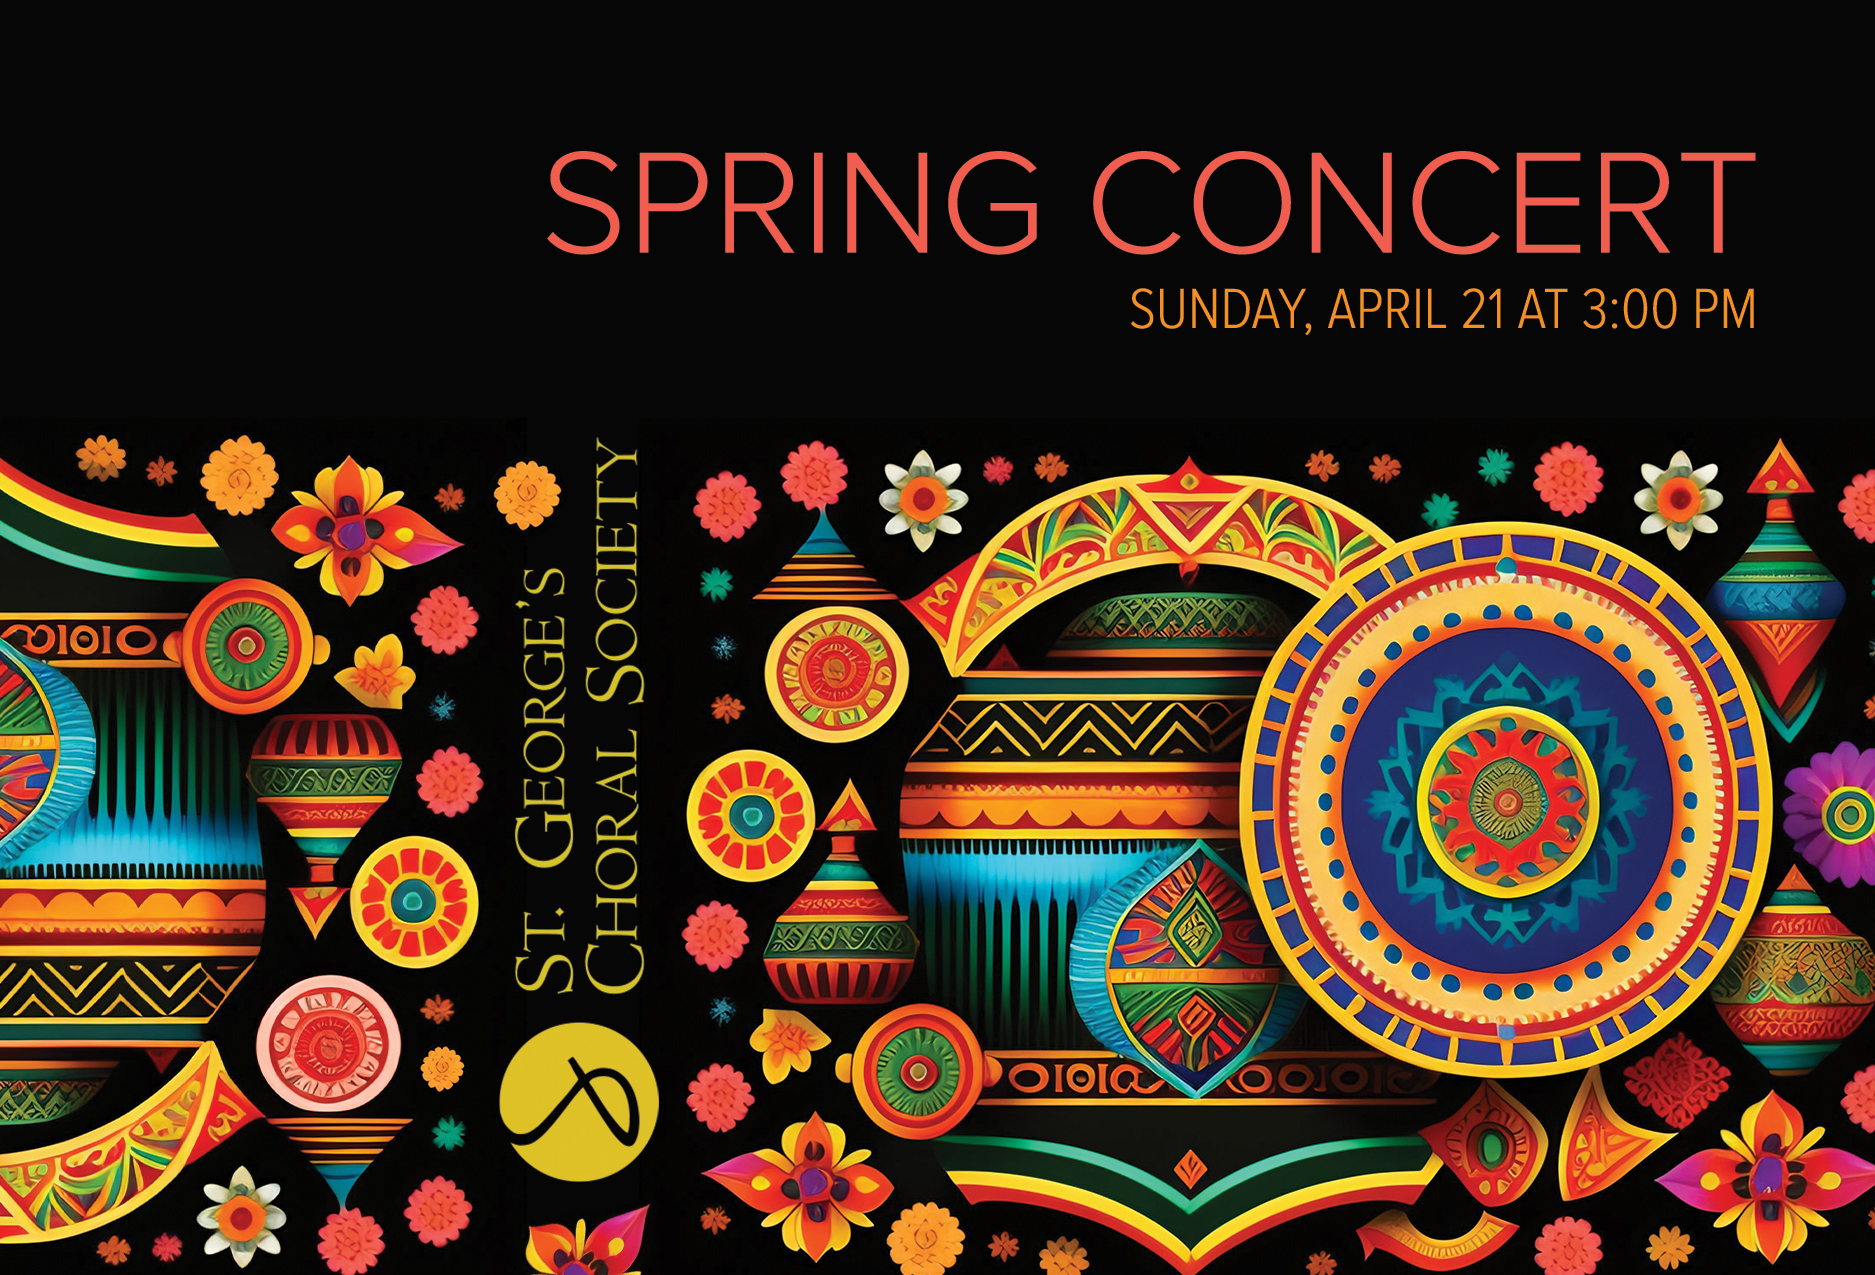 St. George’s Choral Society Spring Concert